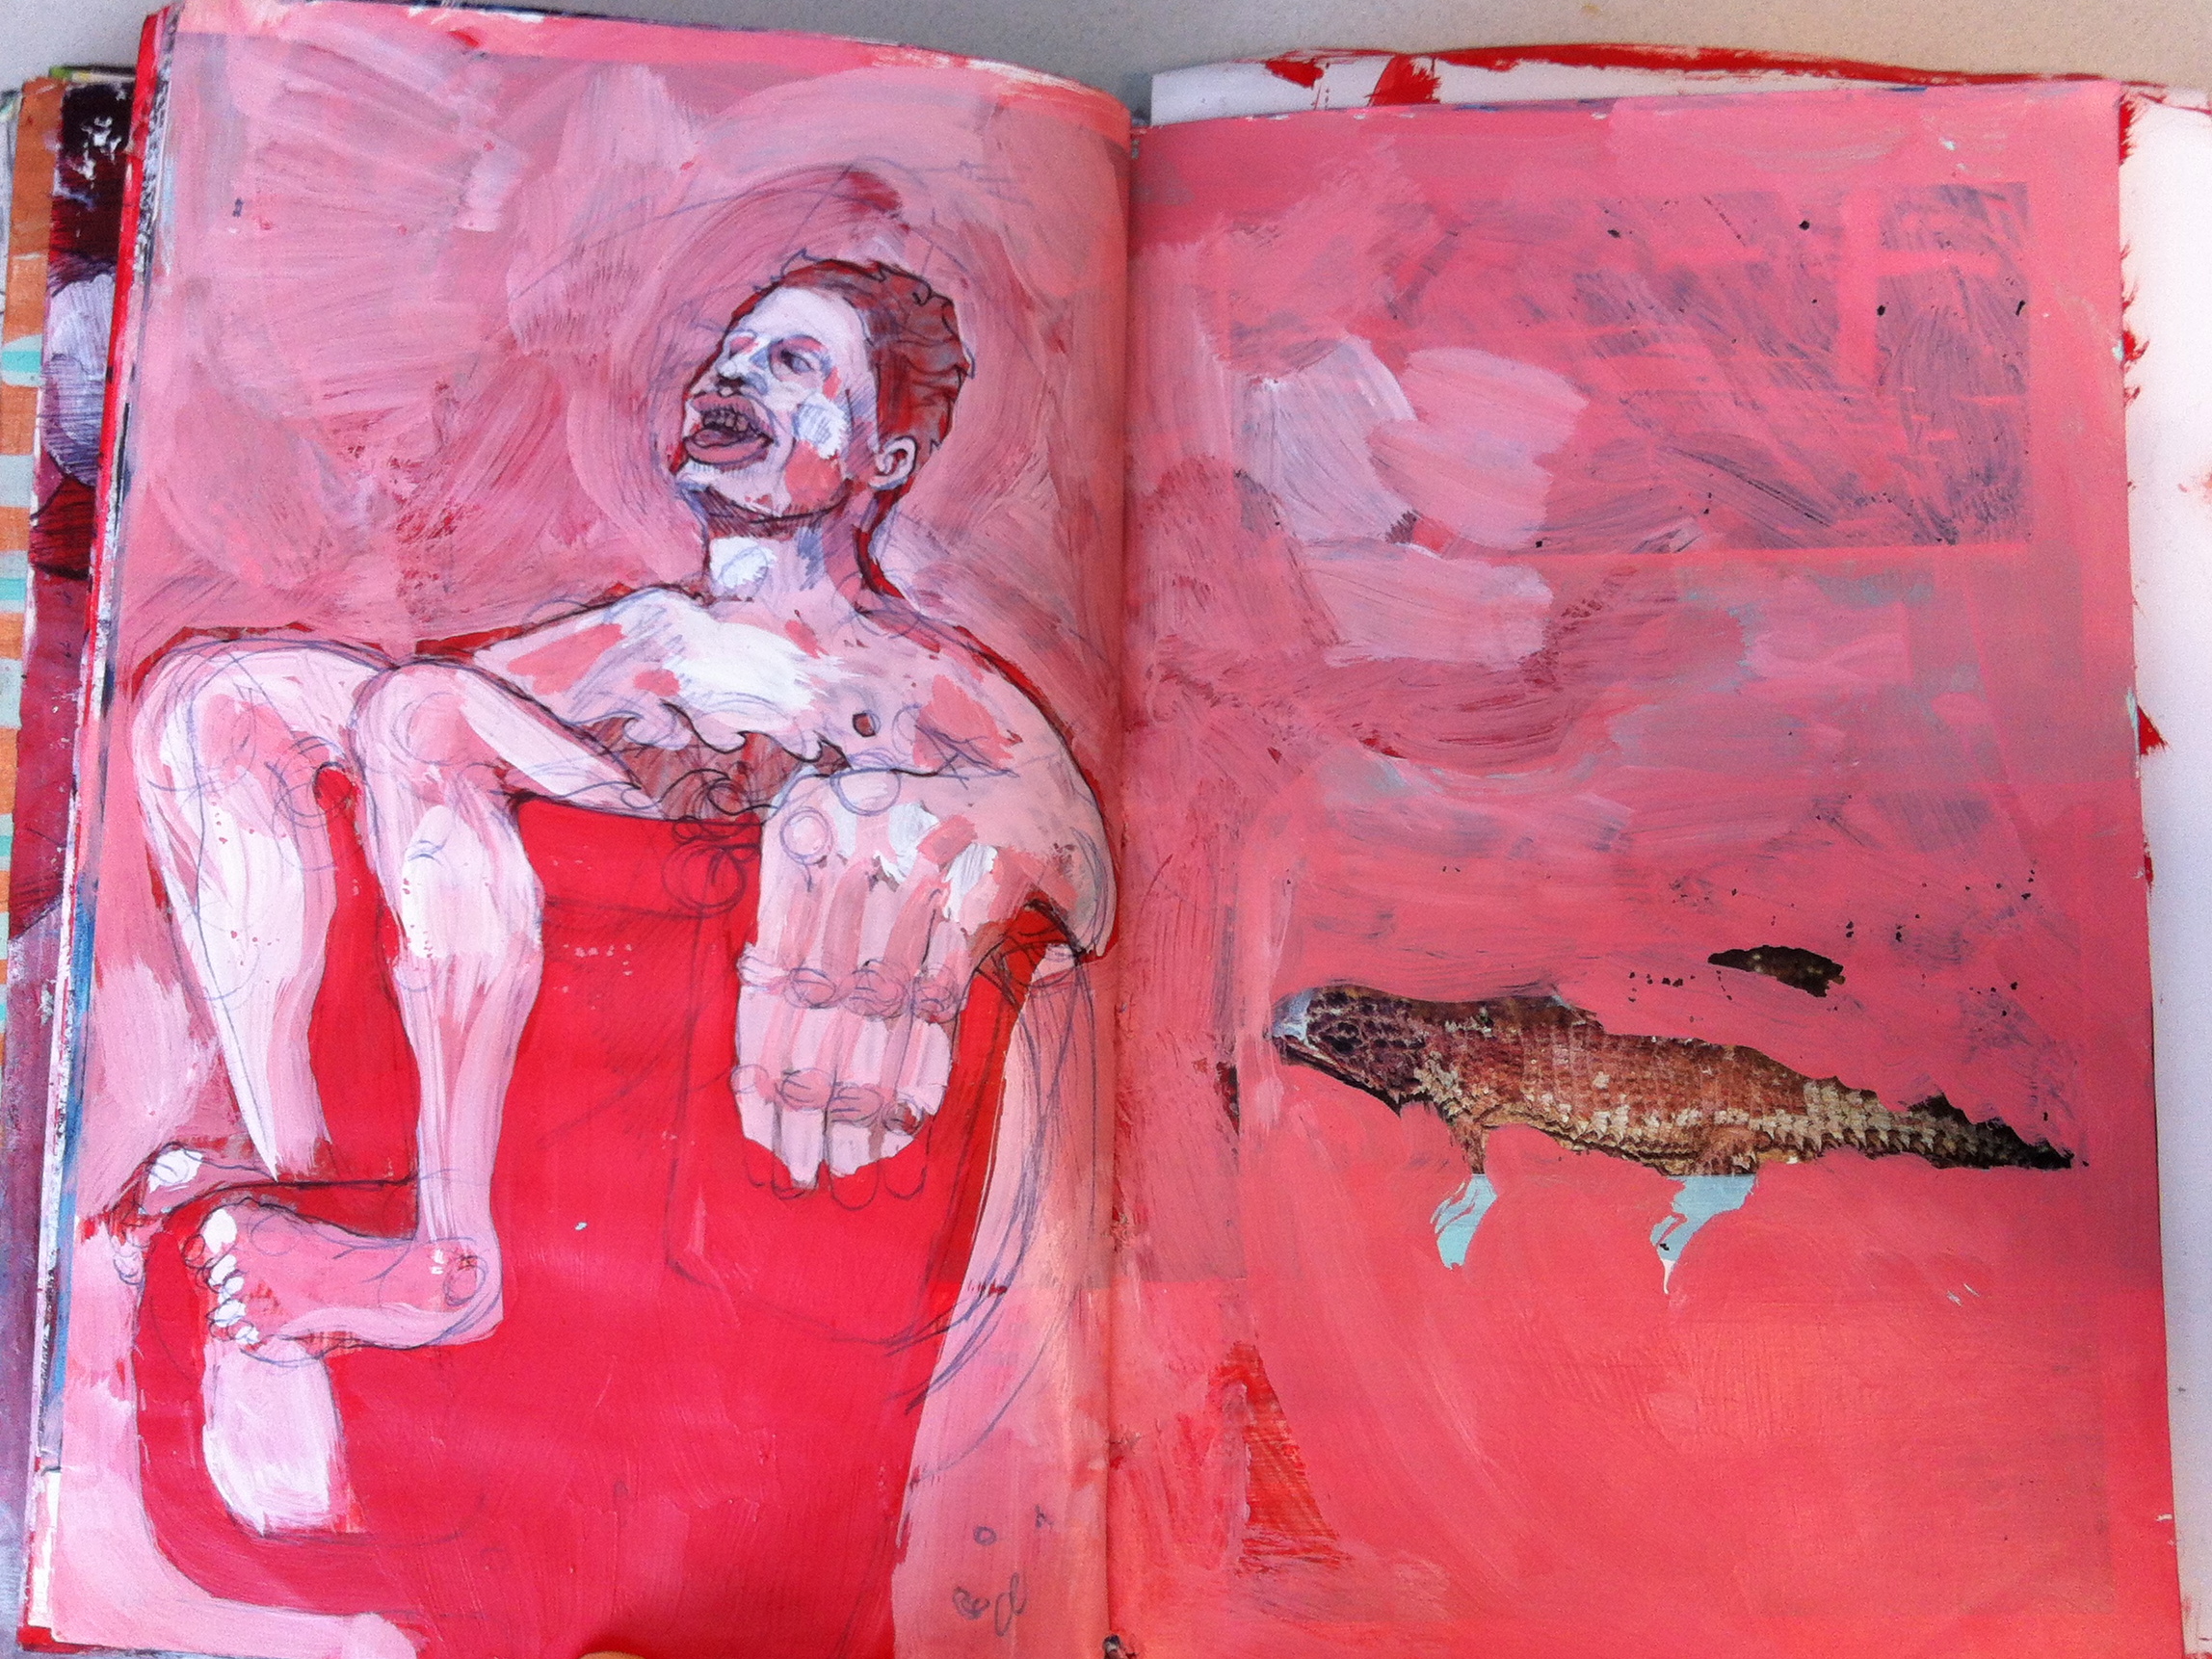 Ink drawing of man sitting in tub, on red background with white 